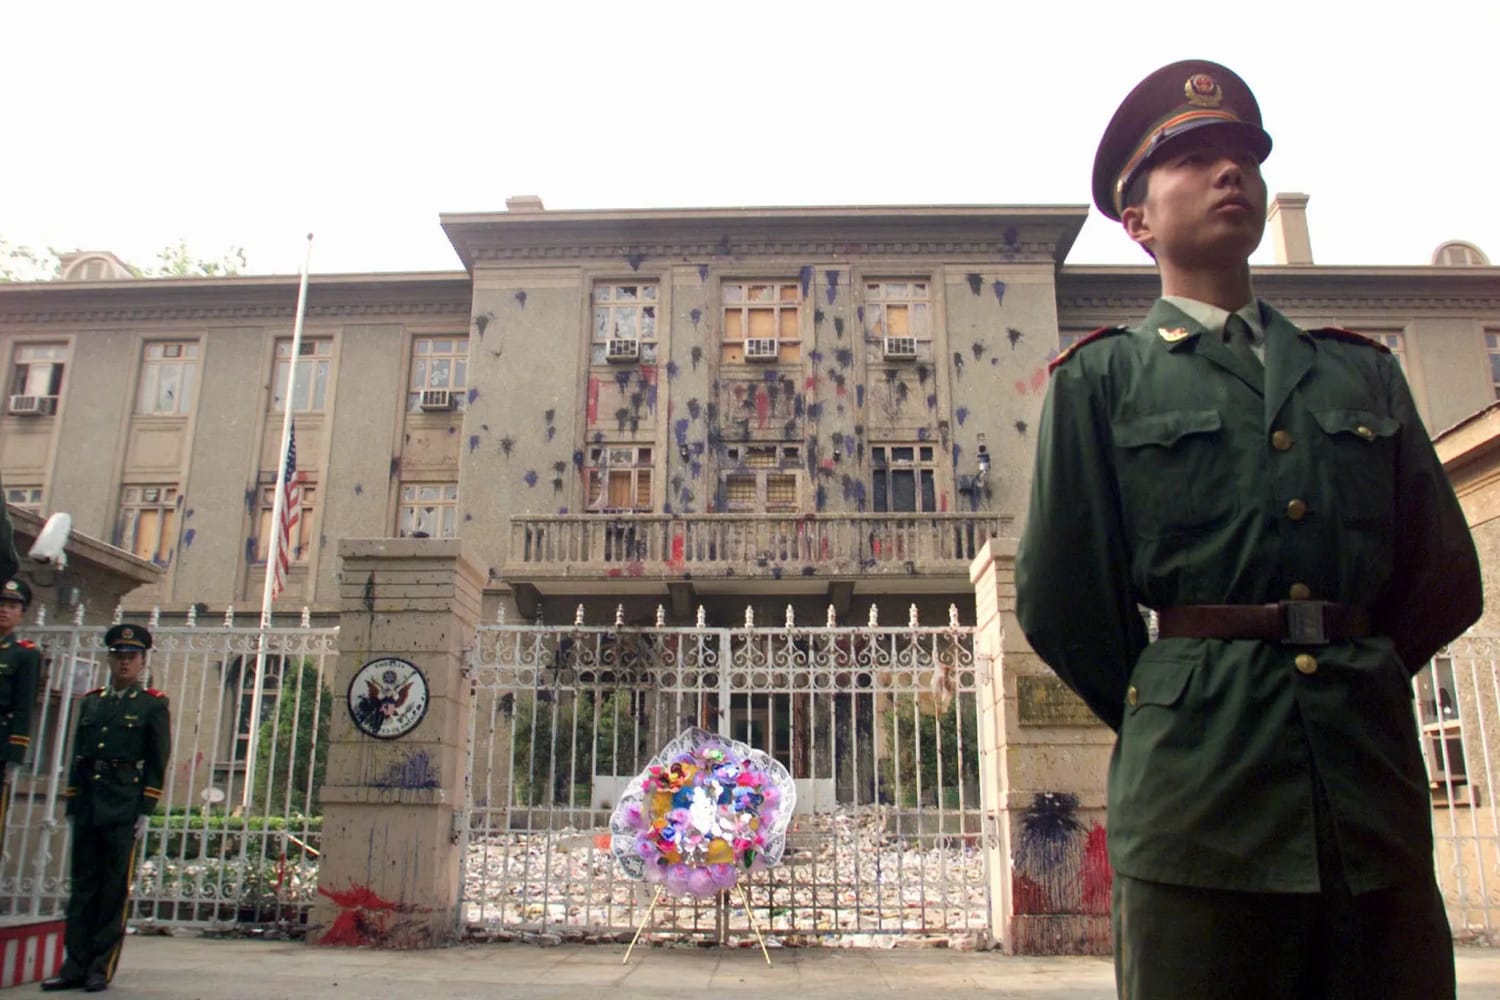 The U.S. Embassy in Beijing after a U.S. bomber accidentally bombed the Chinese embassy in Belgrade, Yugoslavia on May 7th, 1999